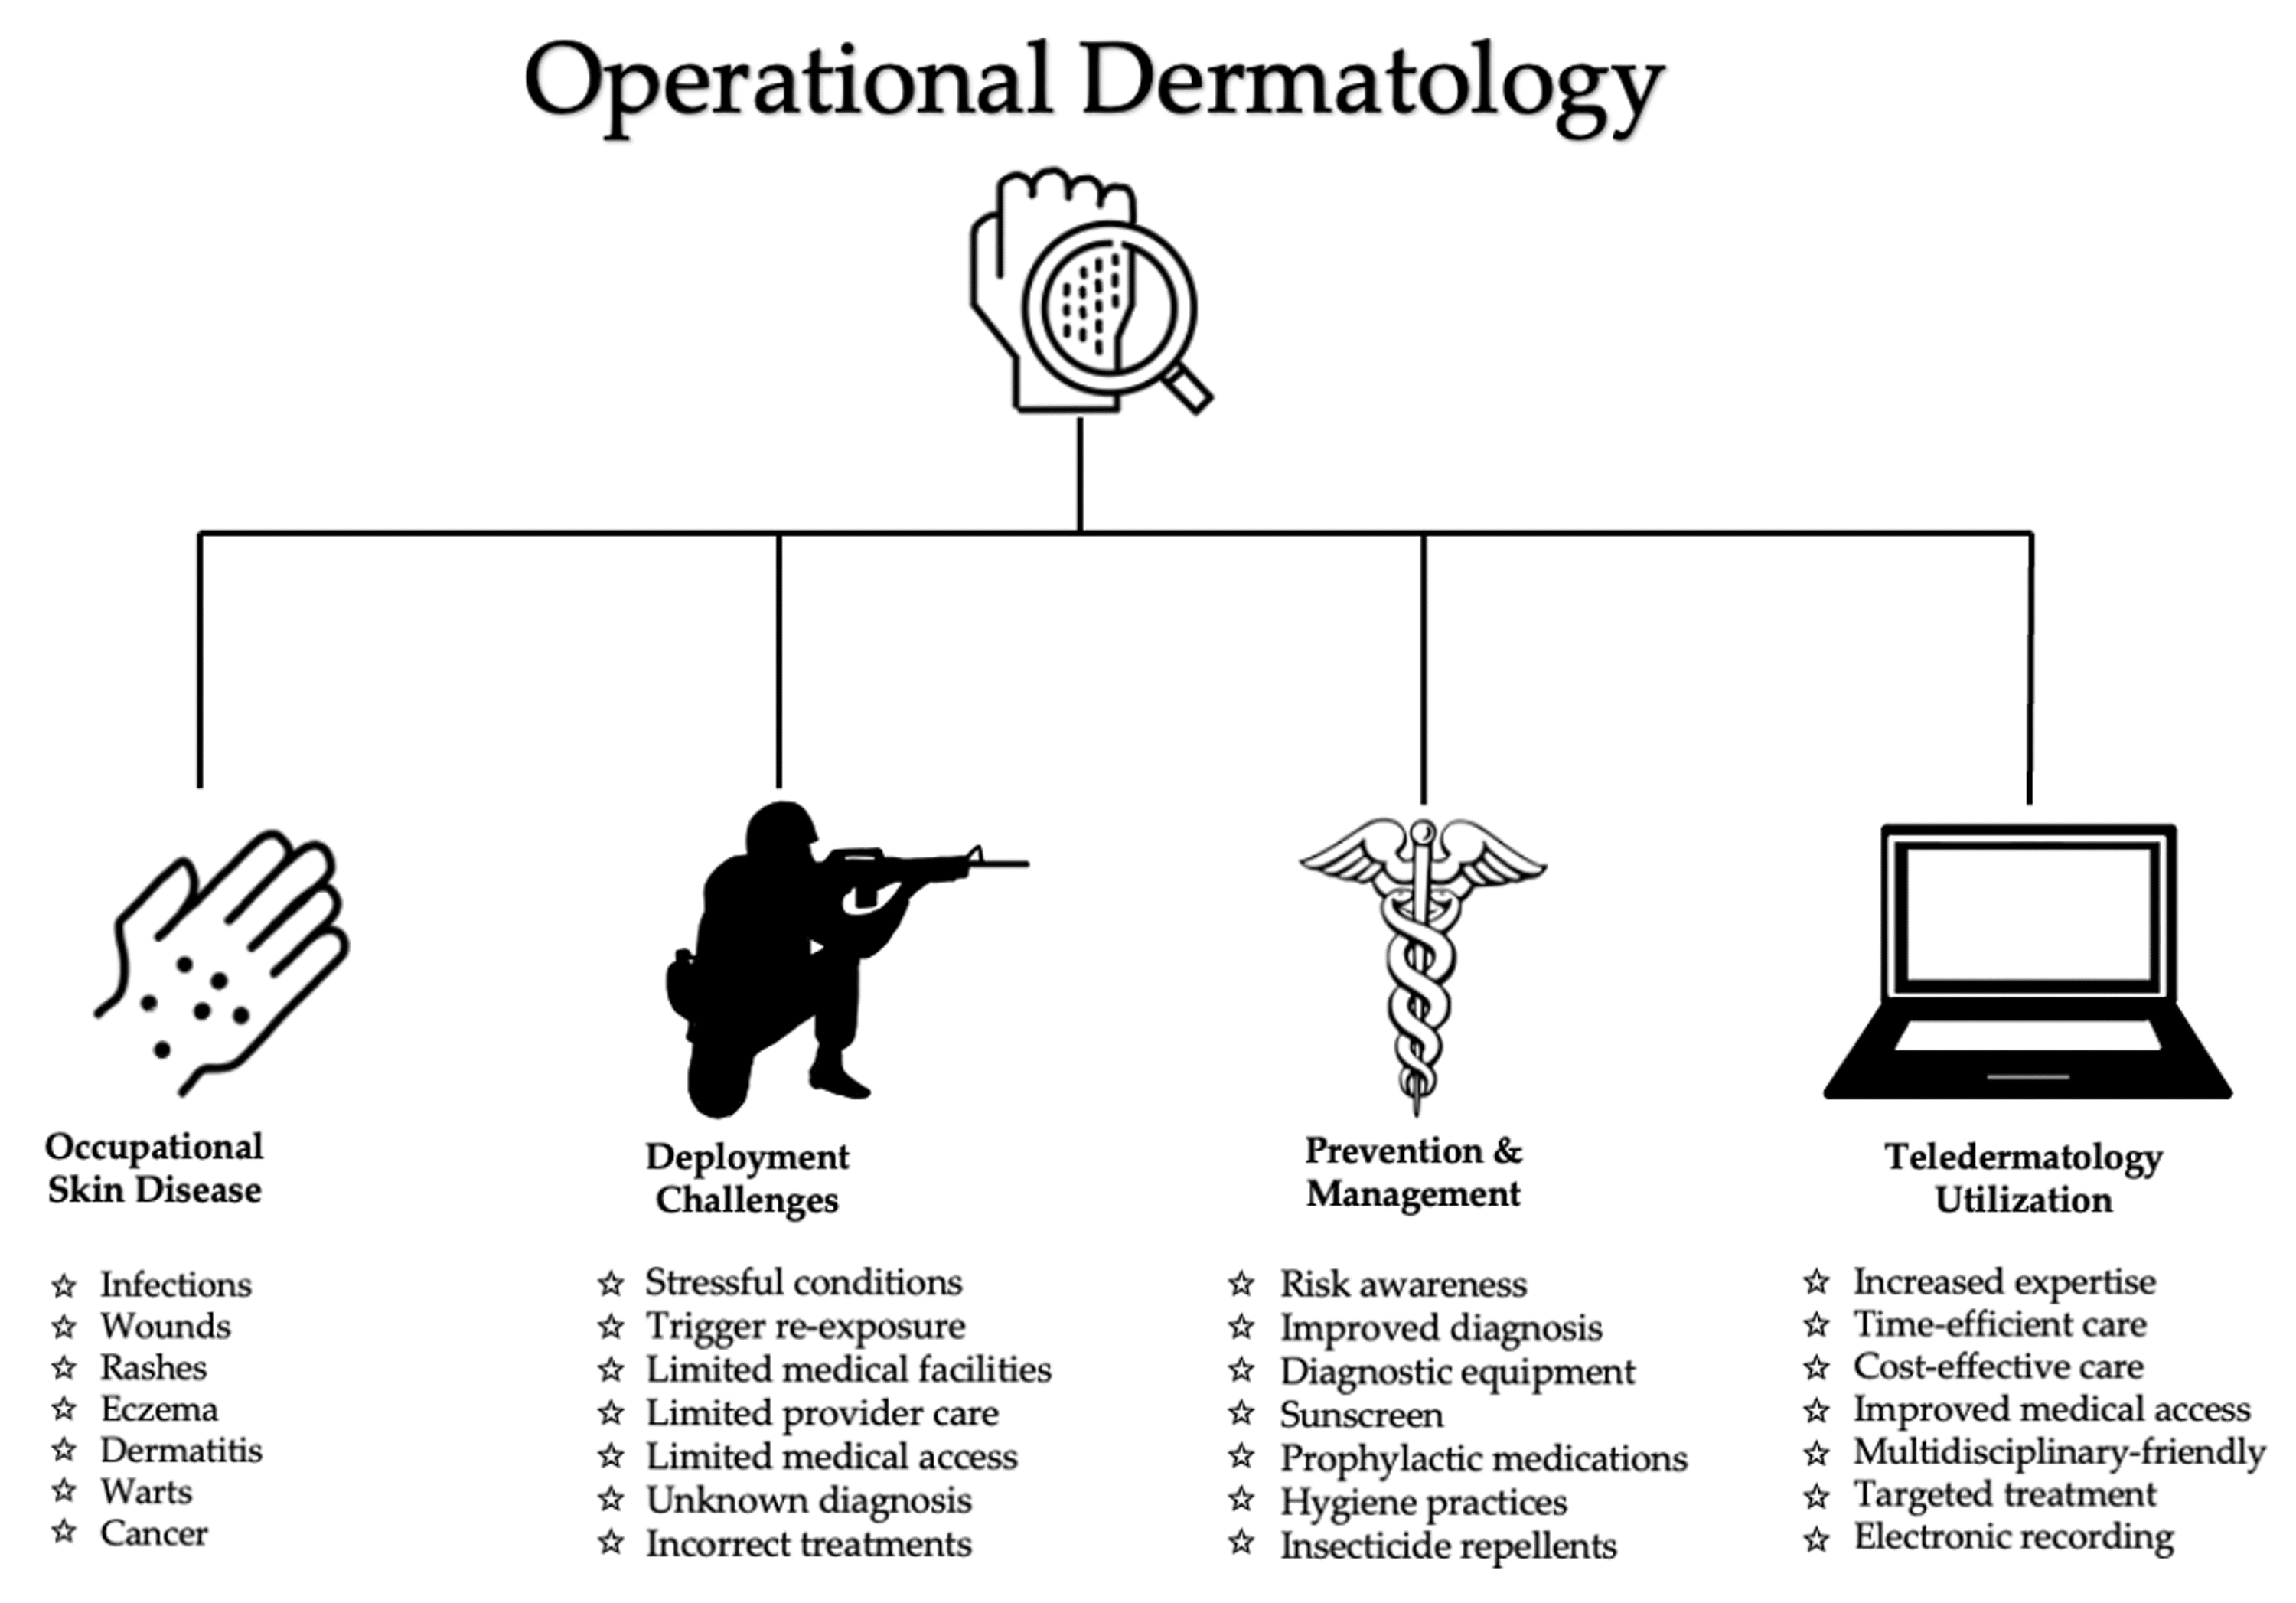 Figure 1: Overview of operational dermatology